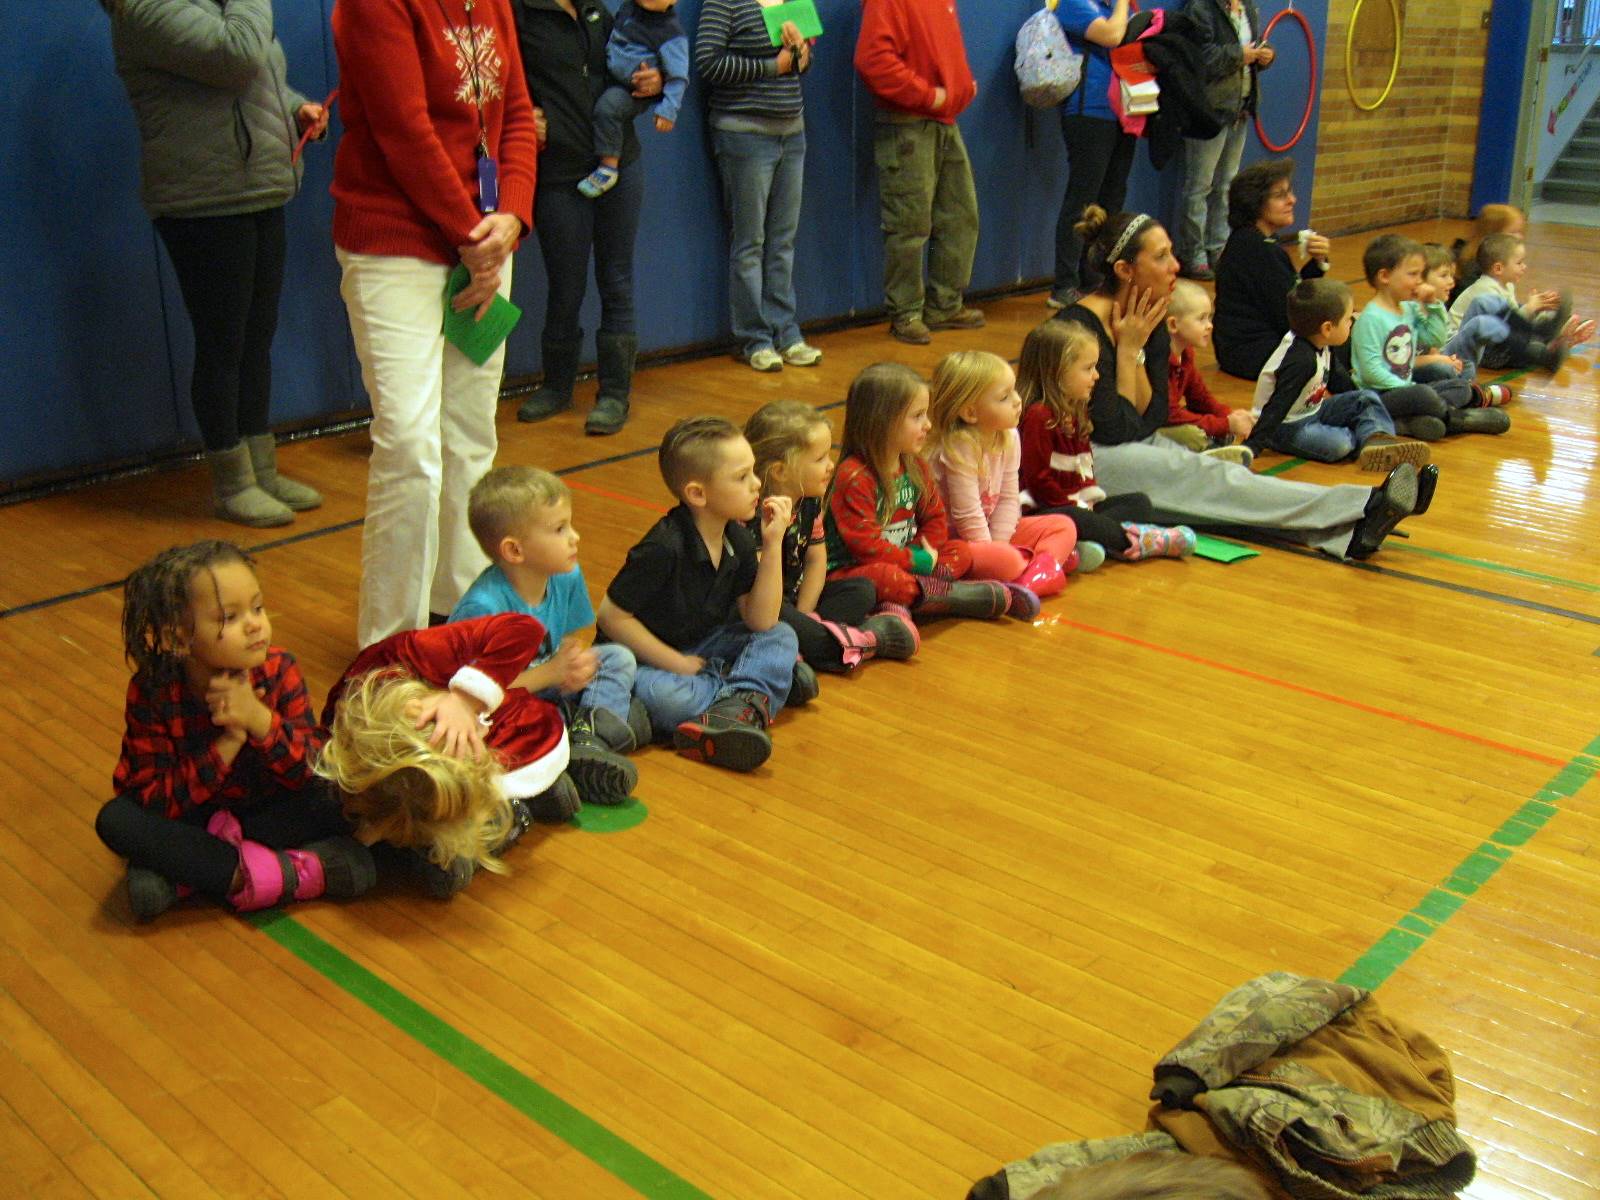 Students watch and listen to songs.